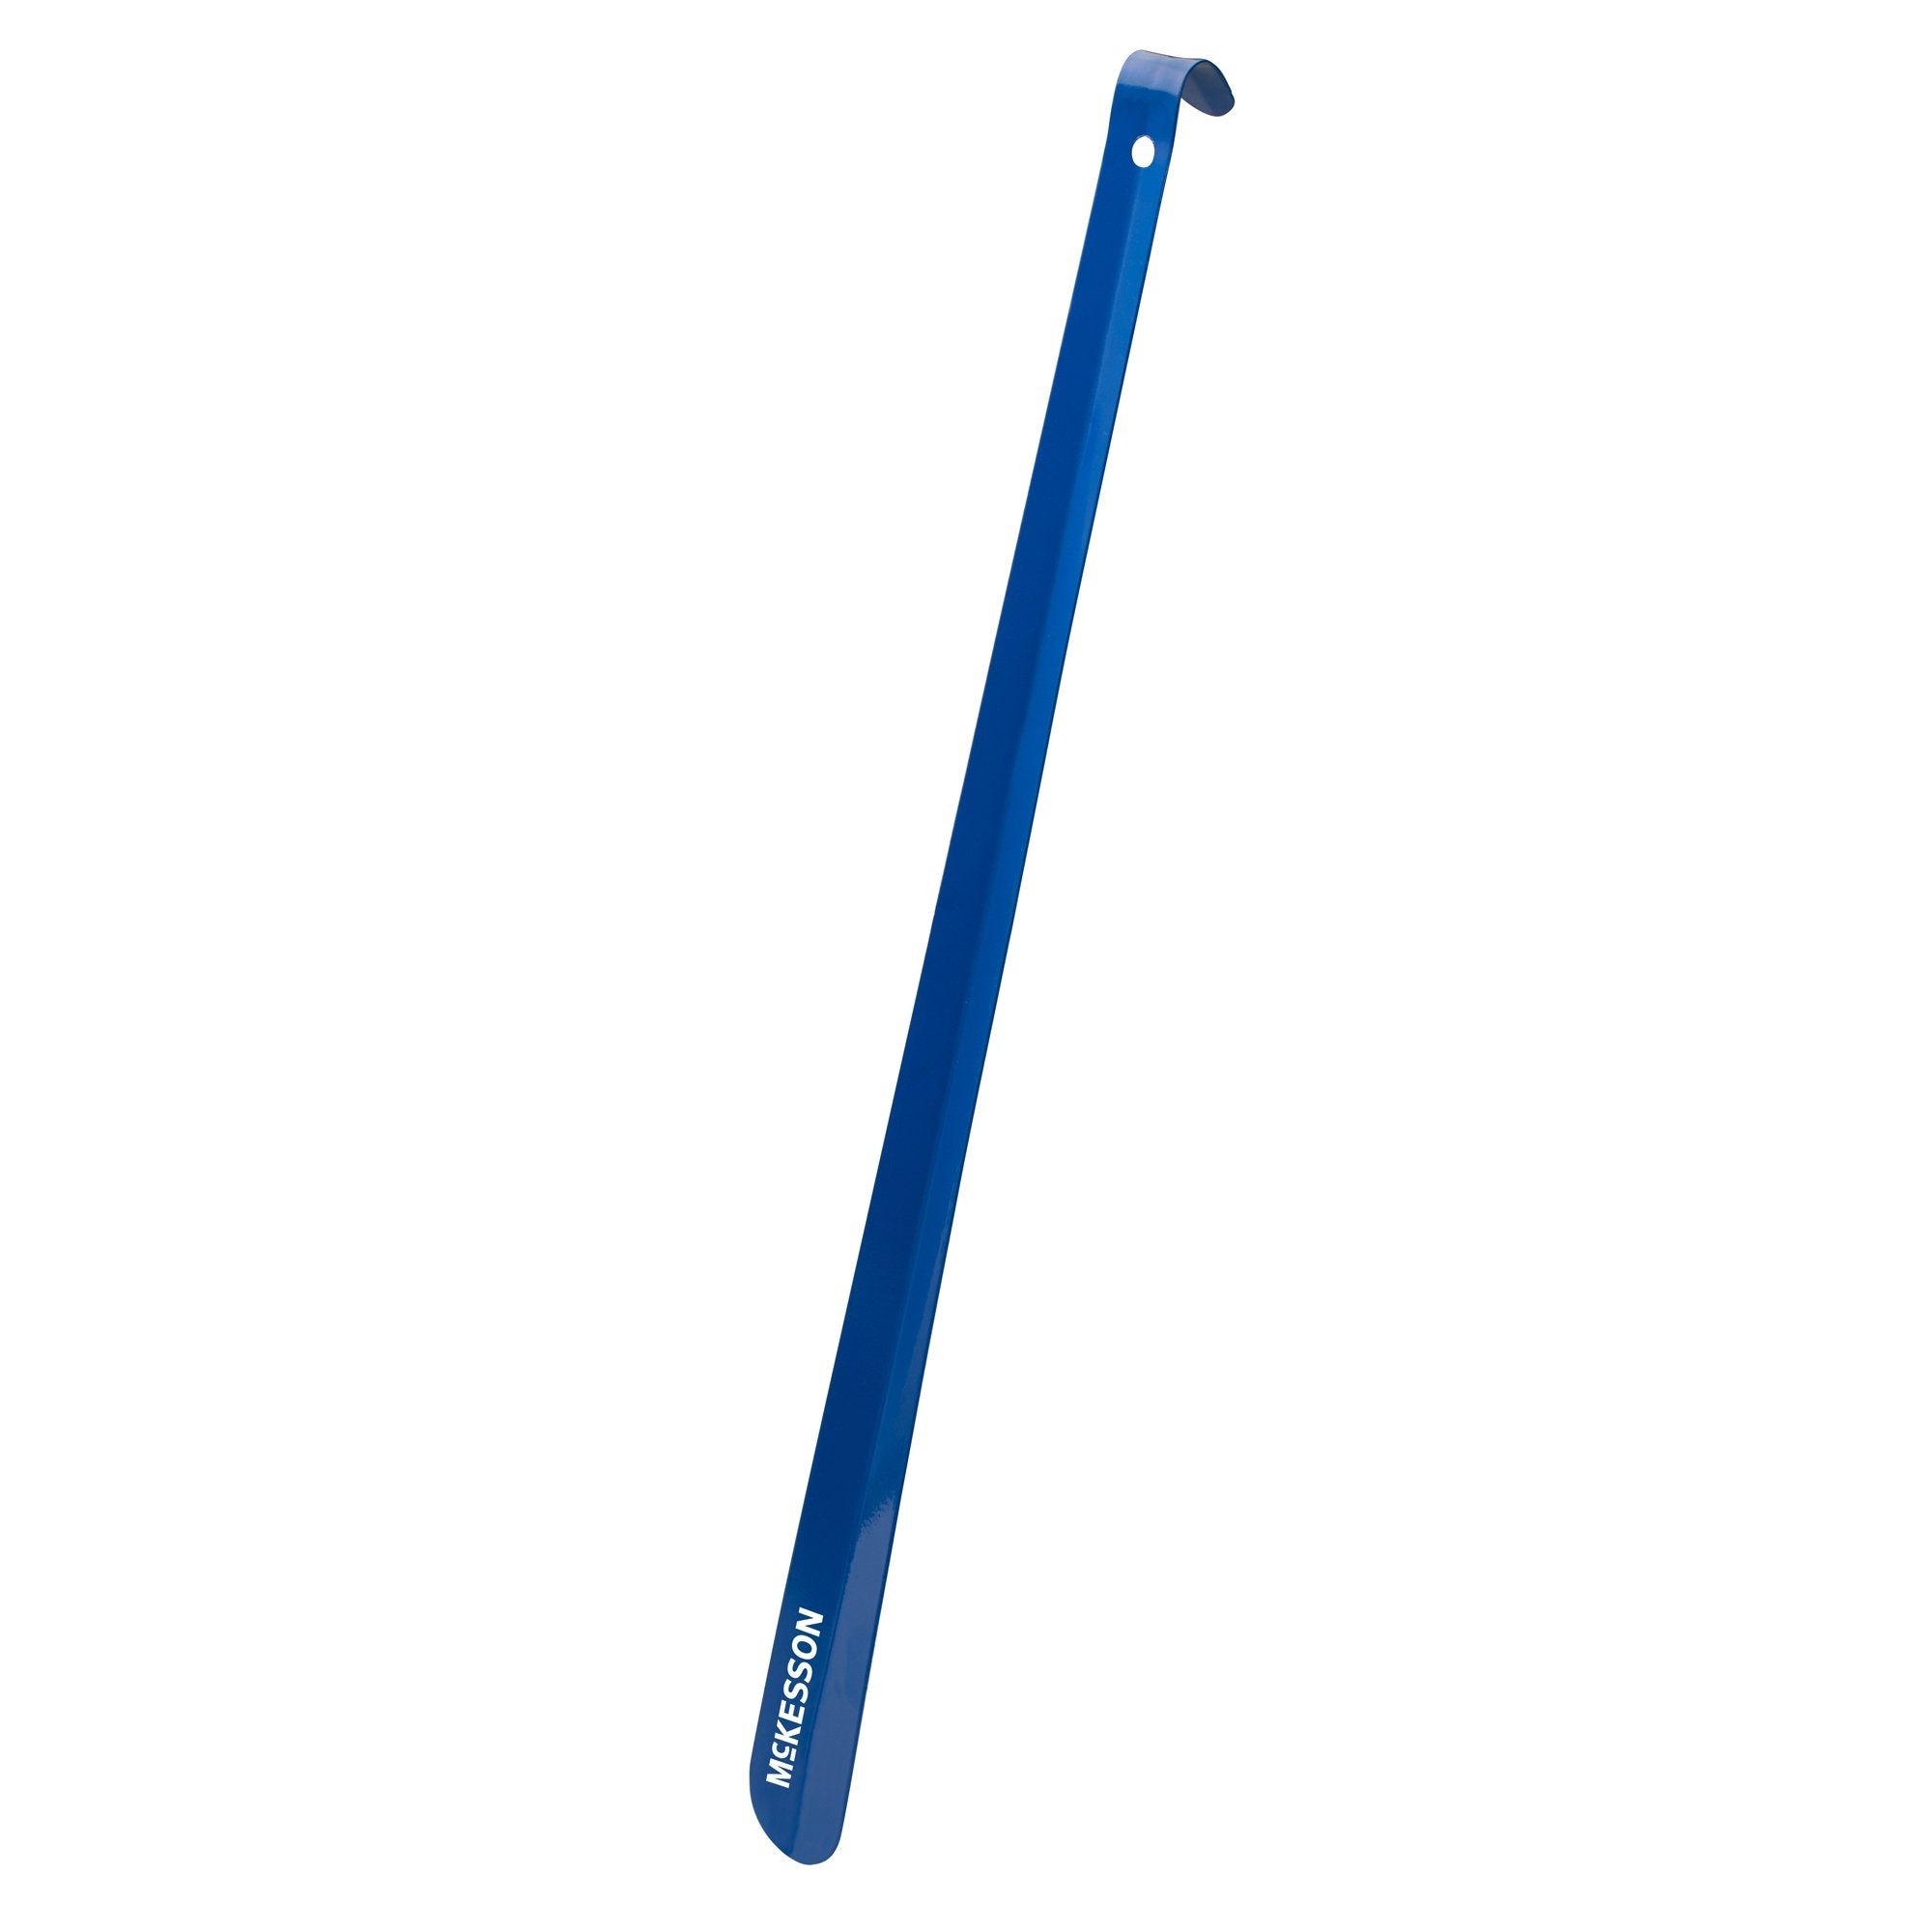 Shoehorn McKesson 23 Inch Length